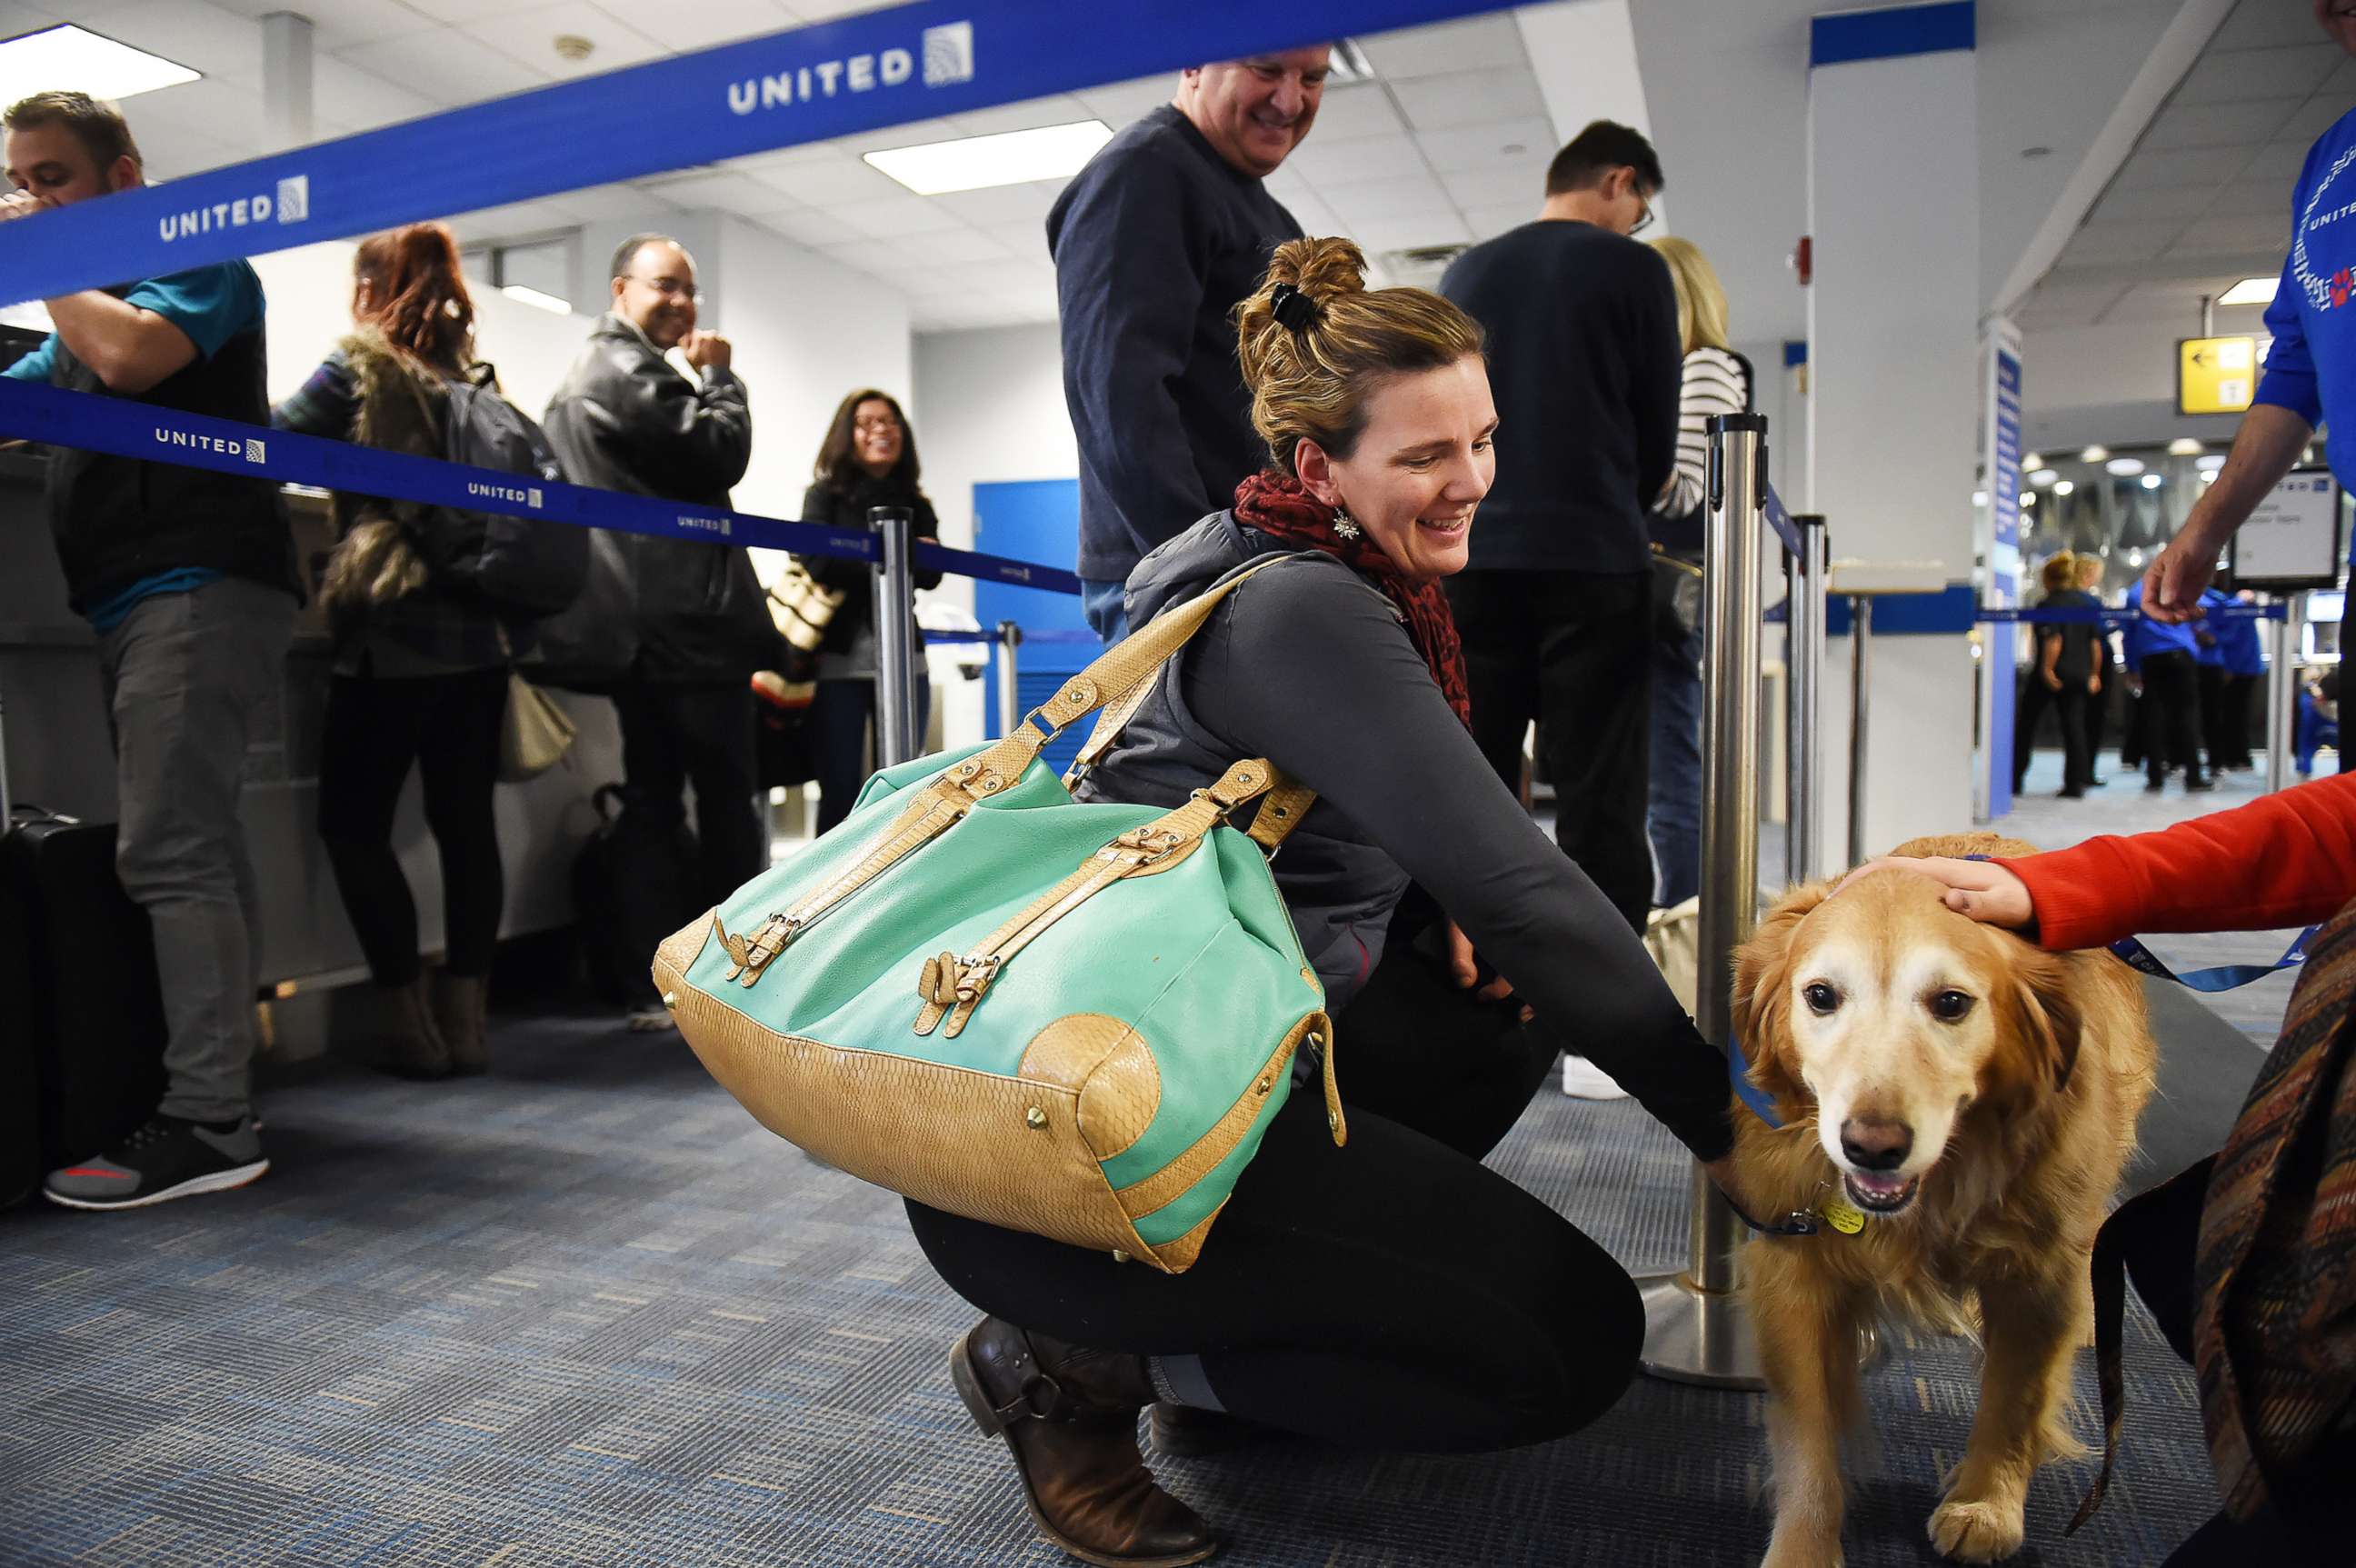 PHOTO: A woman pets a golden retriever that was part of United Paws, a United Airlines program that allows passengers to interact with comfort dogs at Washington Dulles International Airport in Dulles, Va., Dec. 21, 2015.